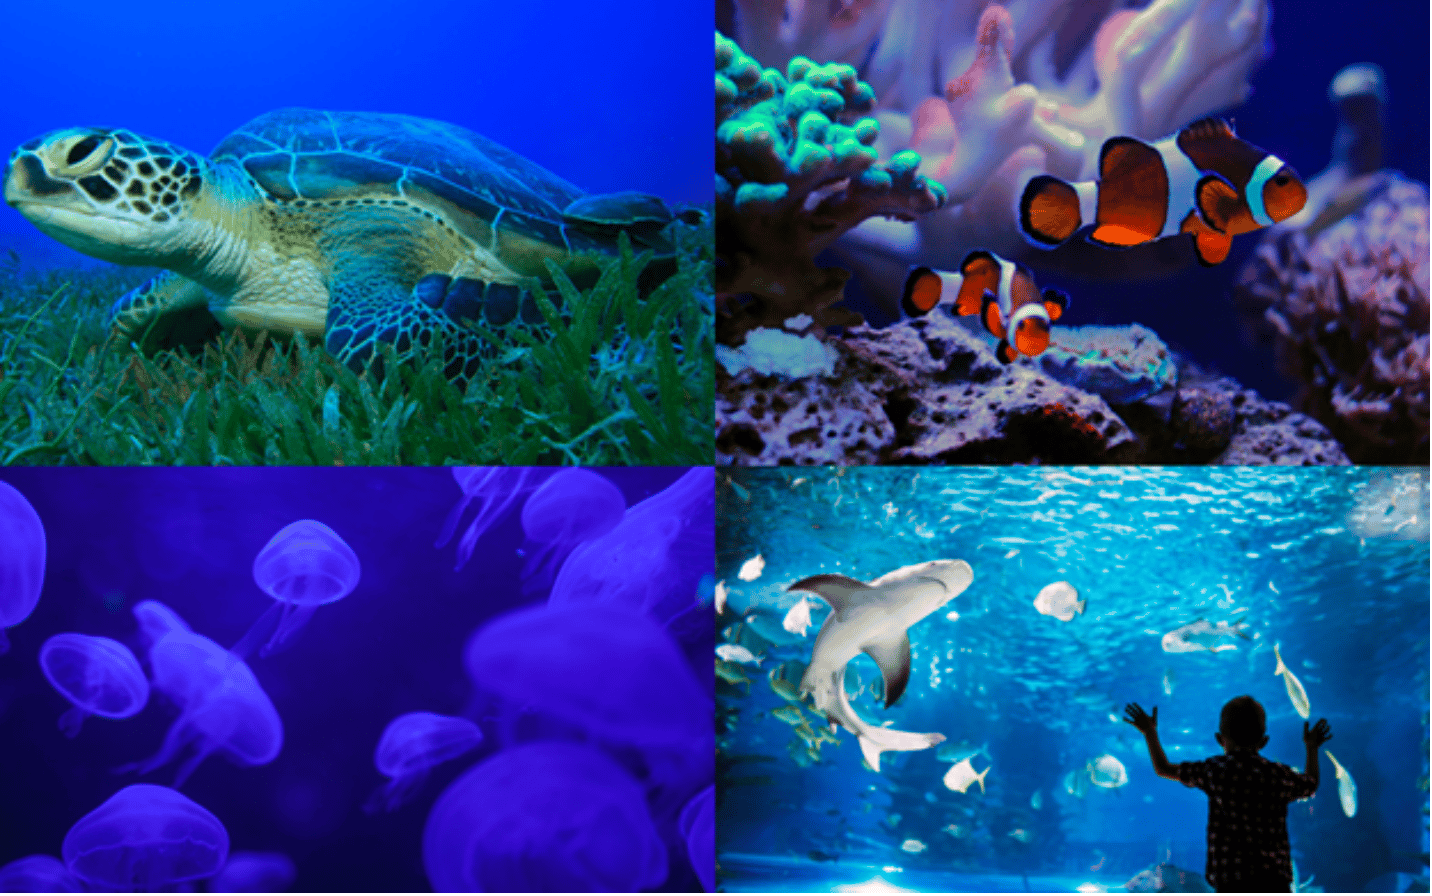 Collage of 4 images: sea turtle, tropical fish, a shark and jellyfish